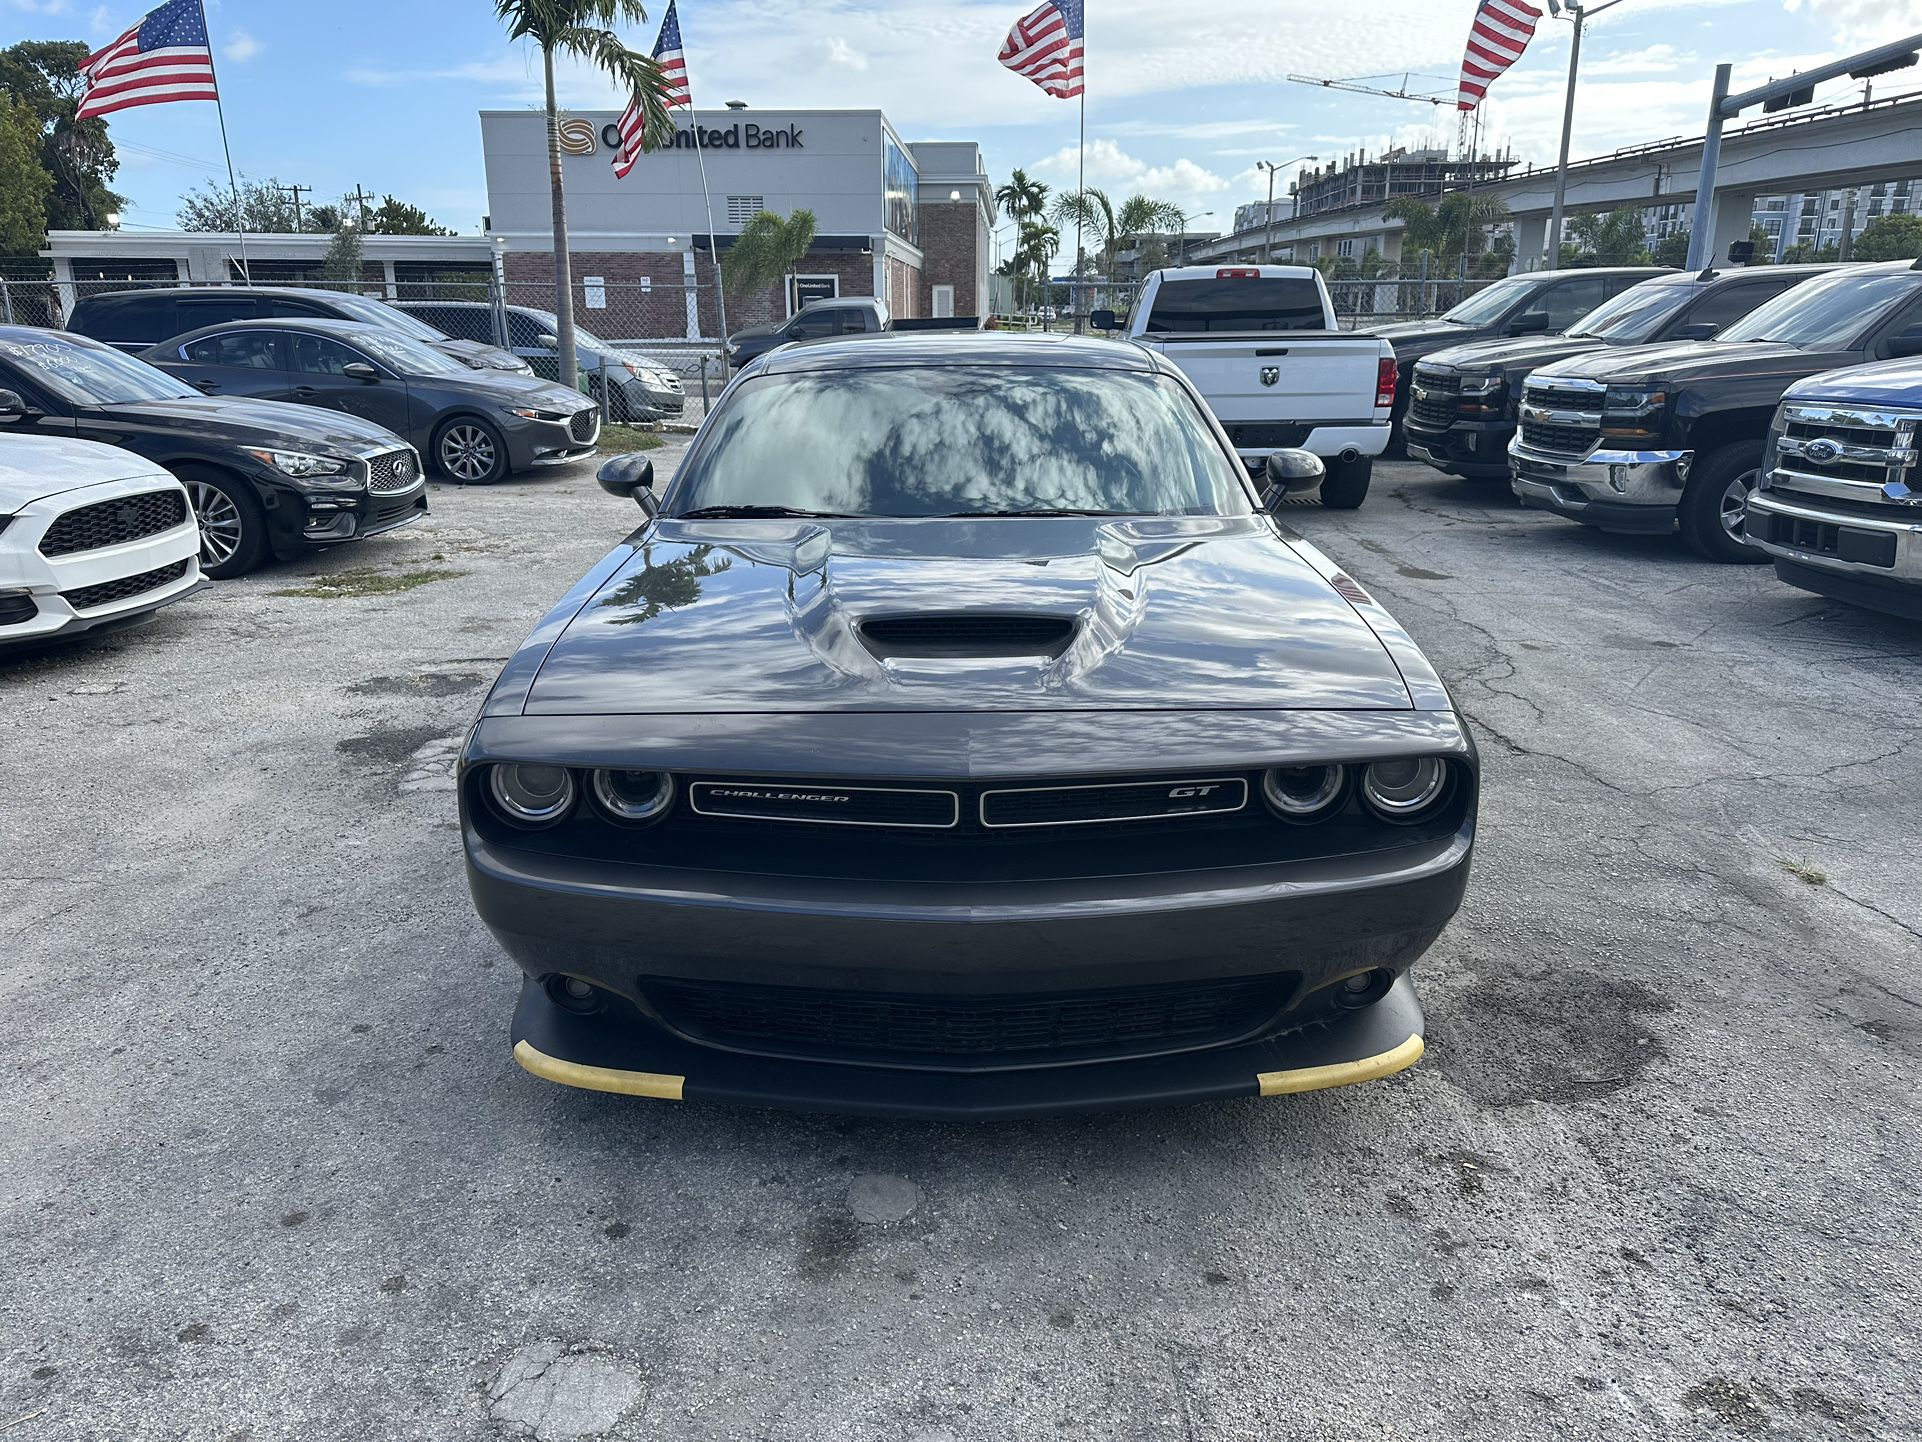 used 2020 dodge challenger - front view 1